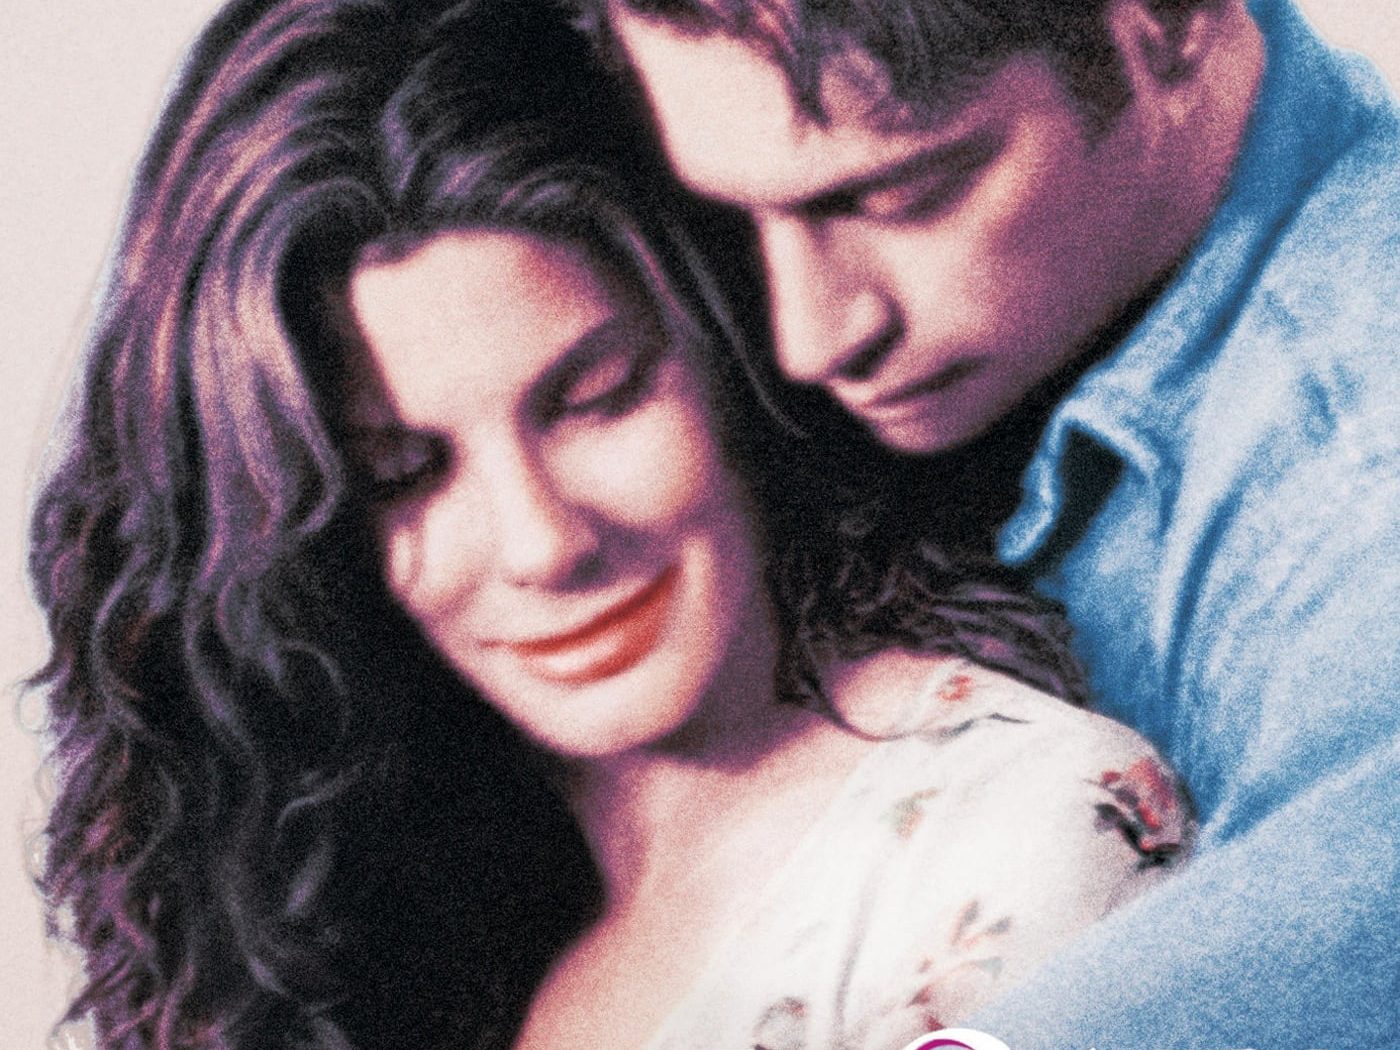 Poster for the movie "Hope Floats"